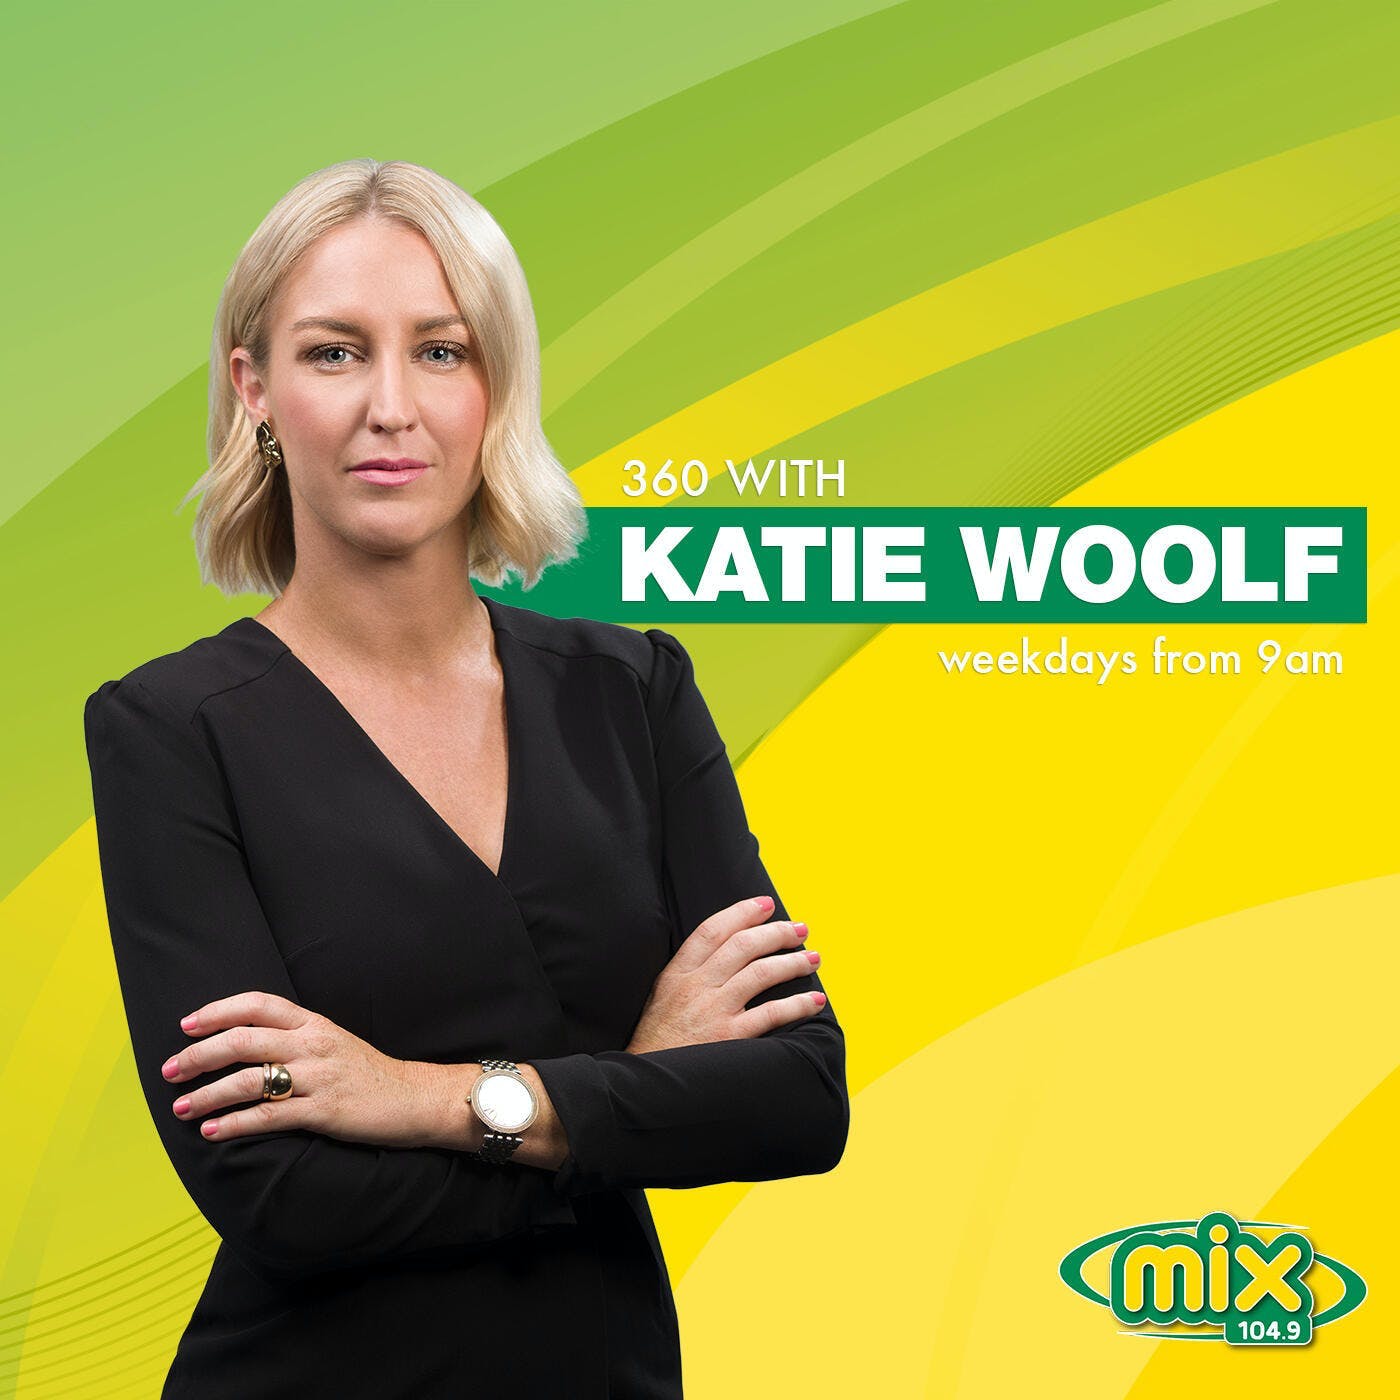 Katie Woolf spoke with Independent MLA Robyn Lambley about the latest lockdown in Alice Springs. They discussed the potential extention of the lockdown and ongoing plans to combat crime and antisocial behaviour.